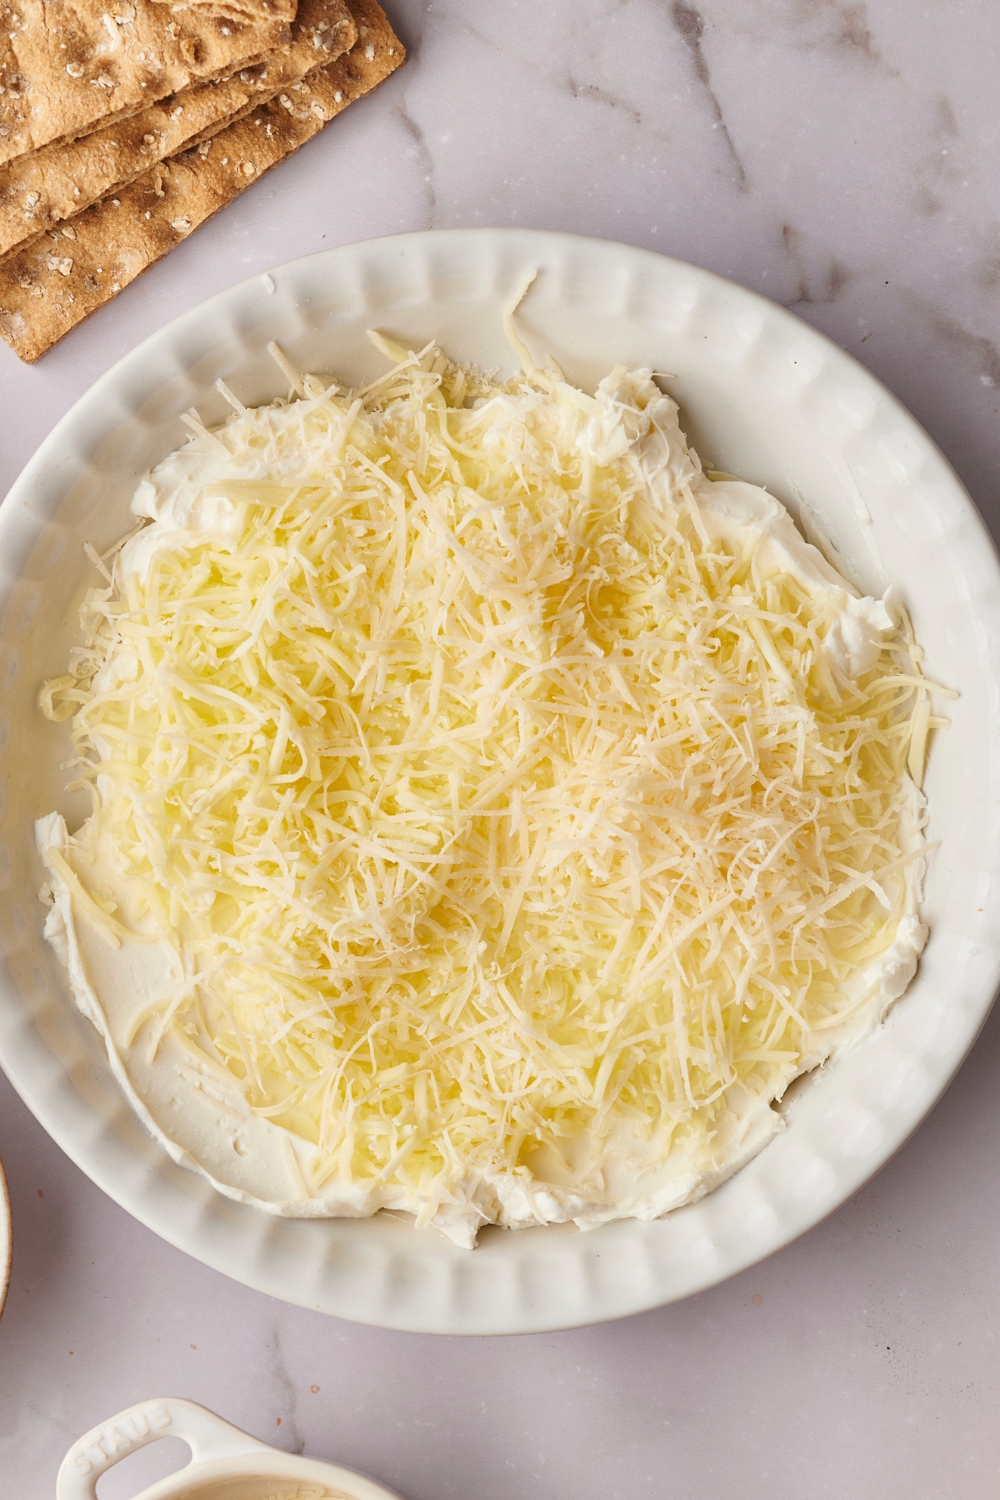 A pie dish with cream cheese and shredded cheese layers.